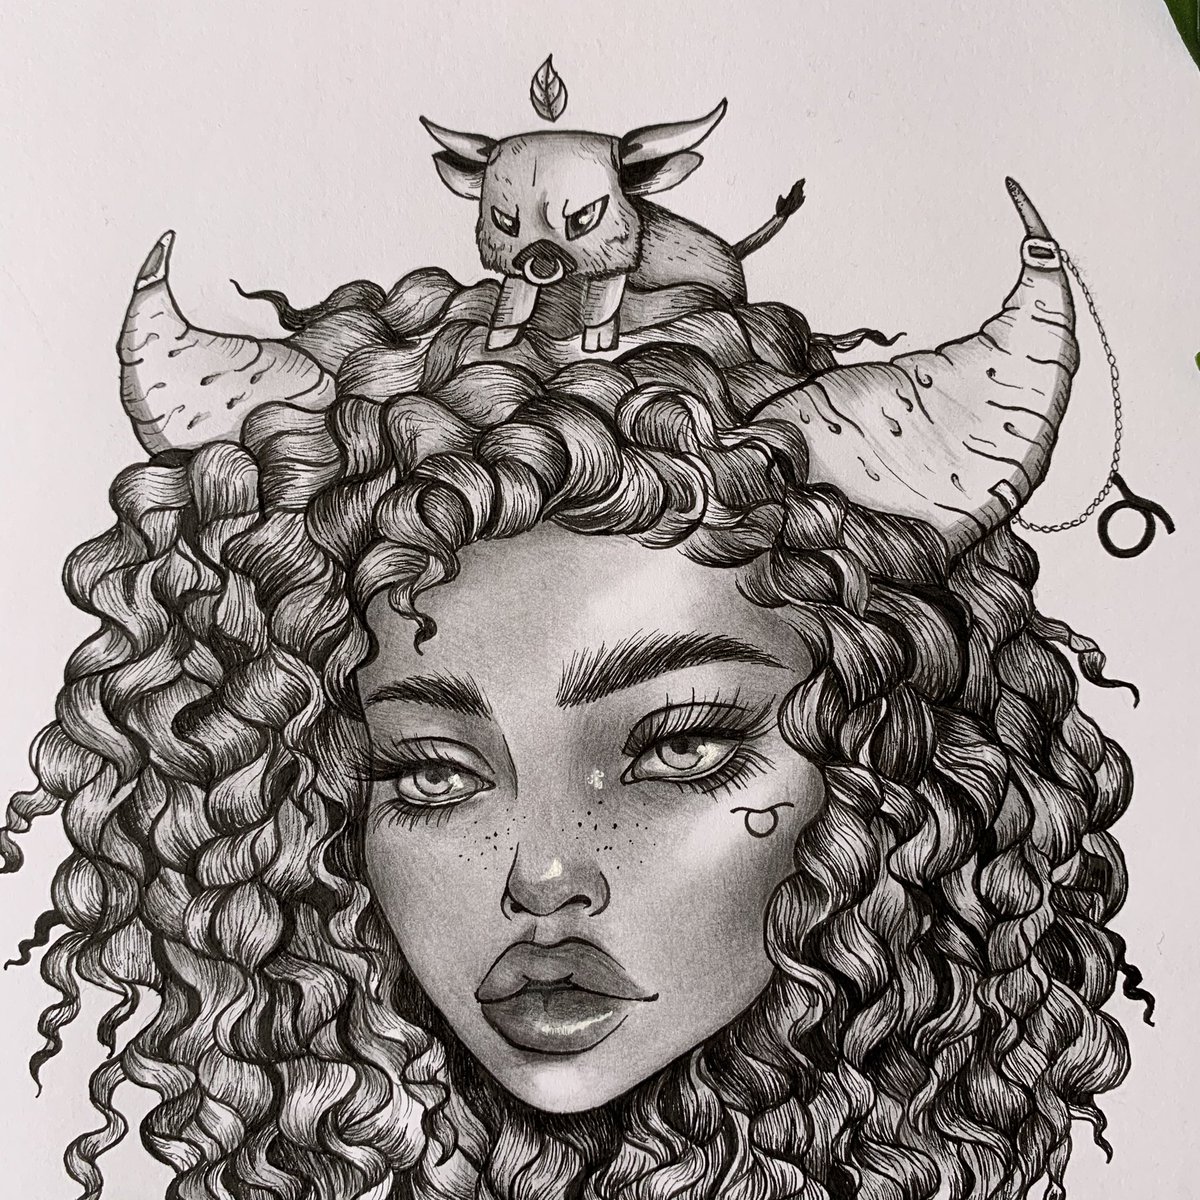 Taurus - the bull ♉️ 
She was my 3rd attempt and i ended up loving her, i guess you can say the stubborn energy came through lol! love y’all though 💓